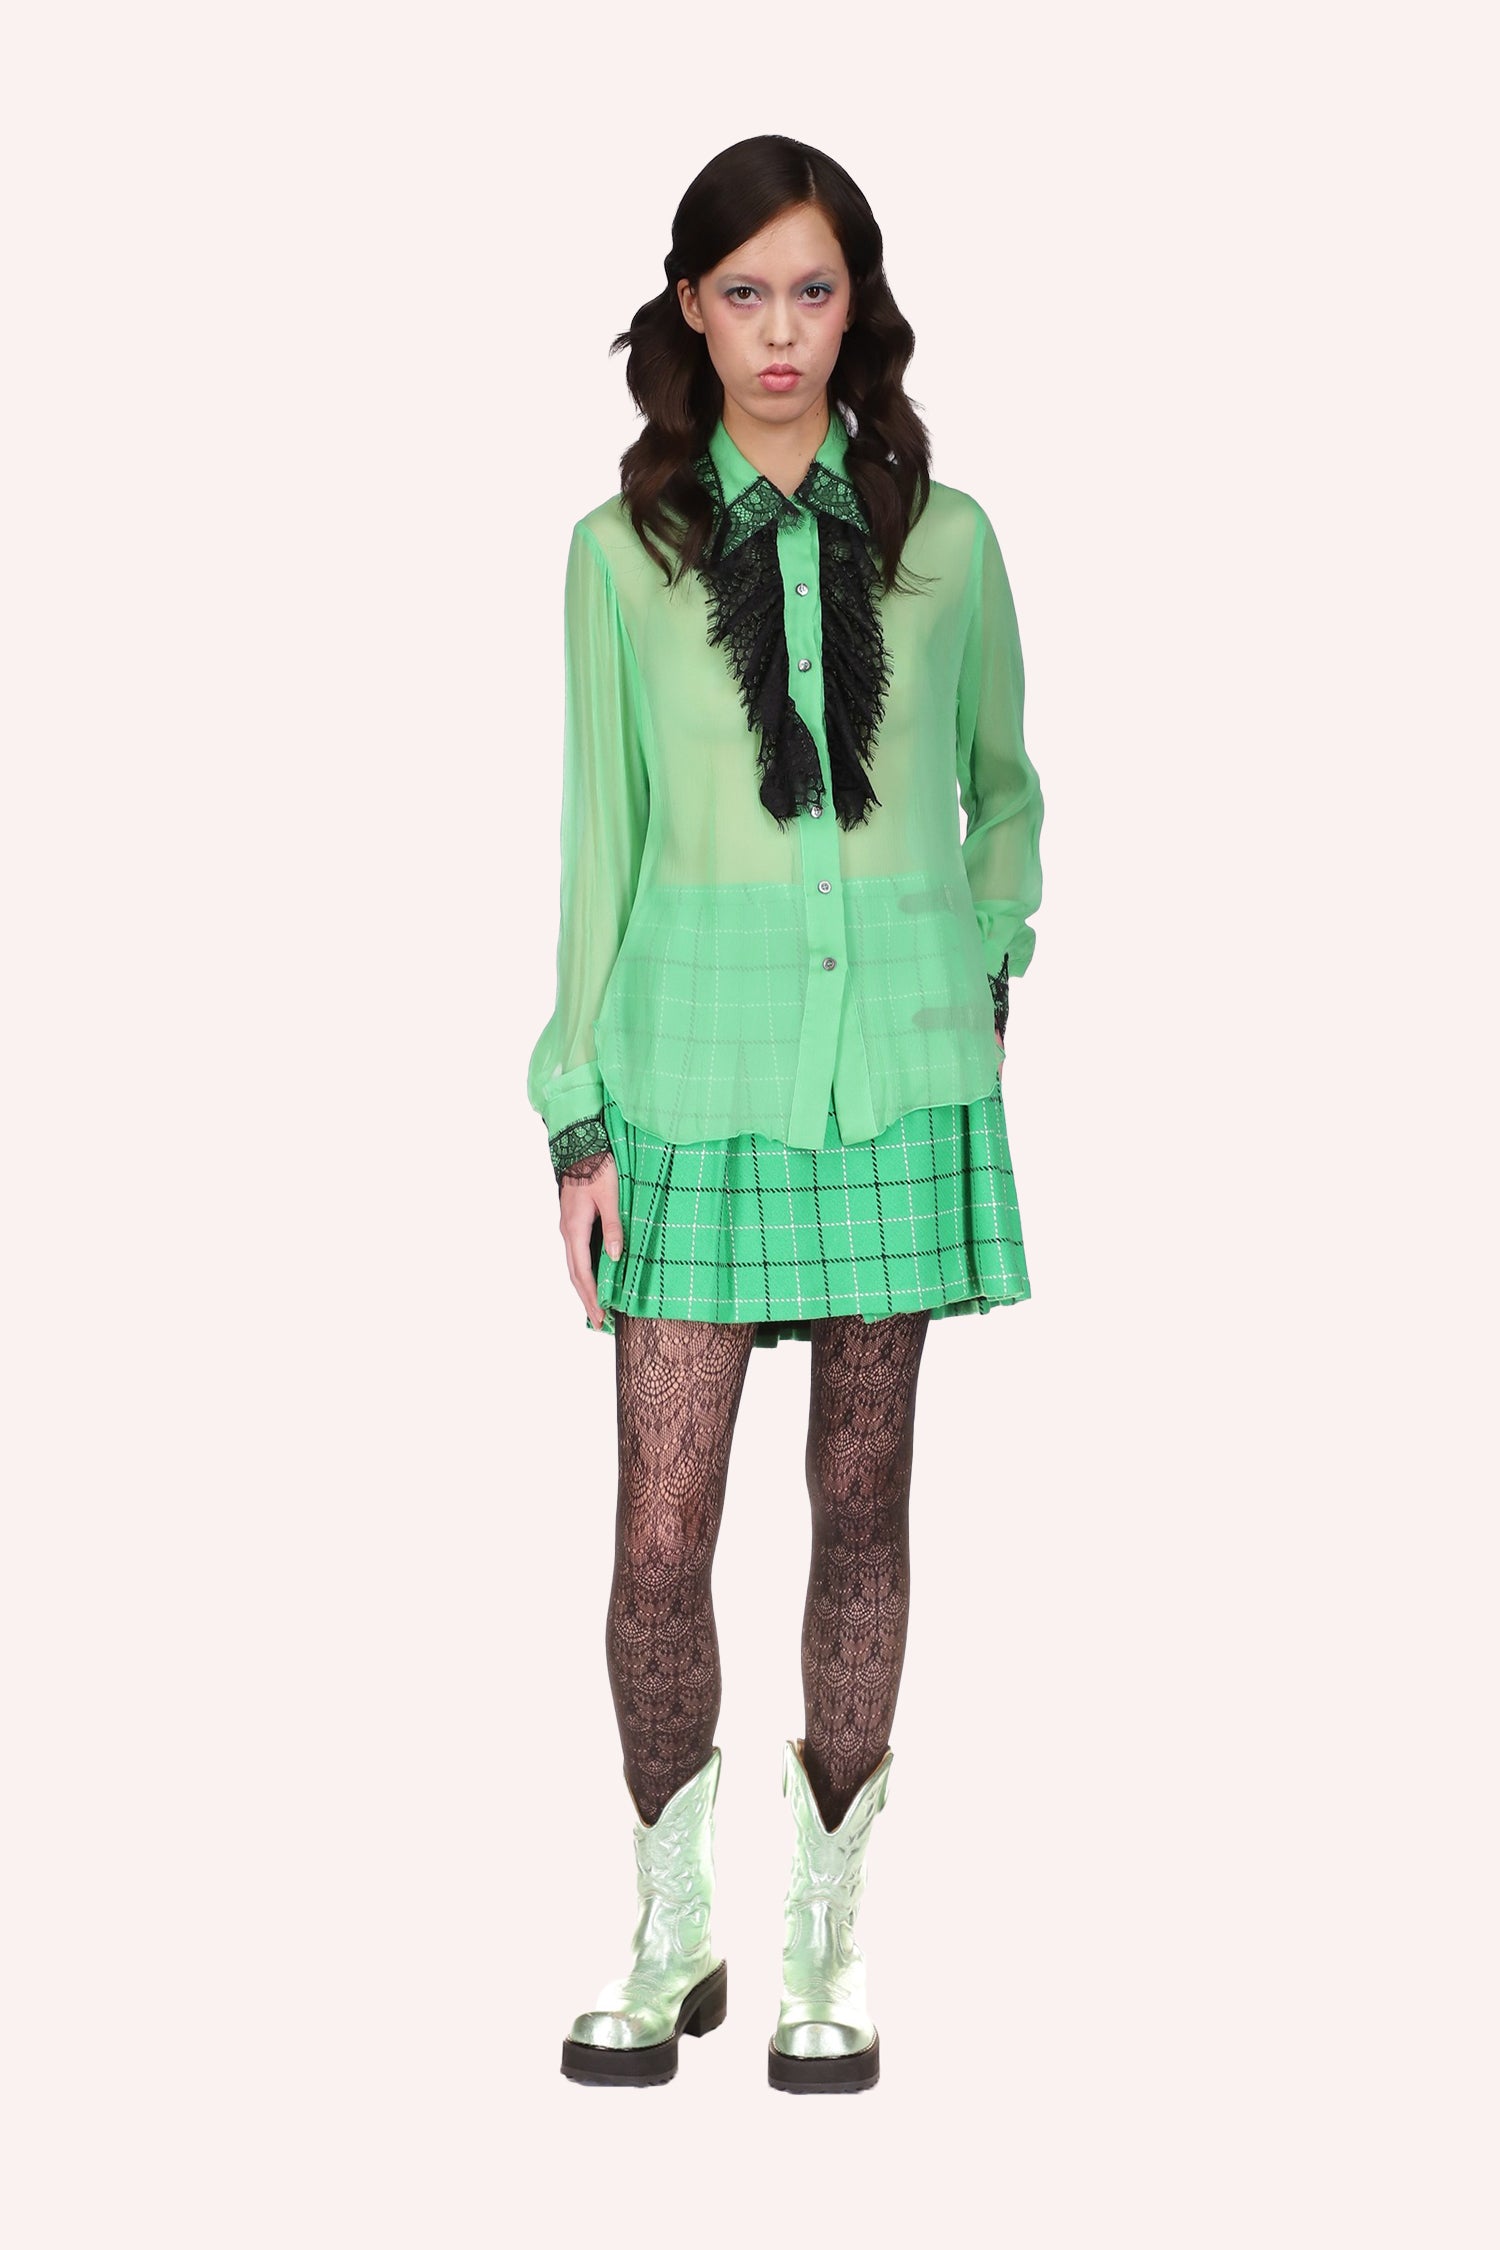 Lingerie Chiffon Ruffle Blouse Peppermint, match with the Anna Sui windowpane skirt and the black boa